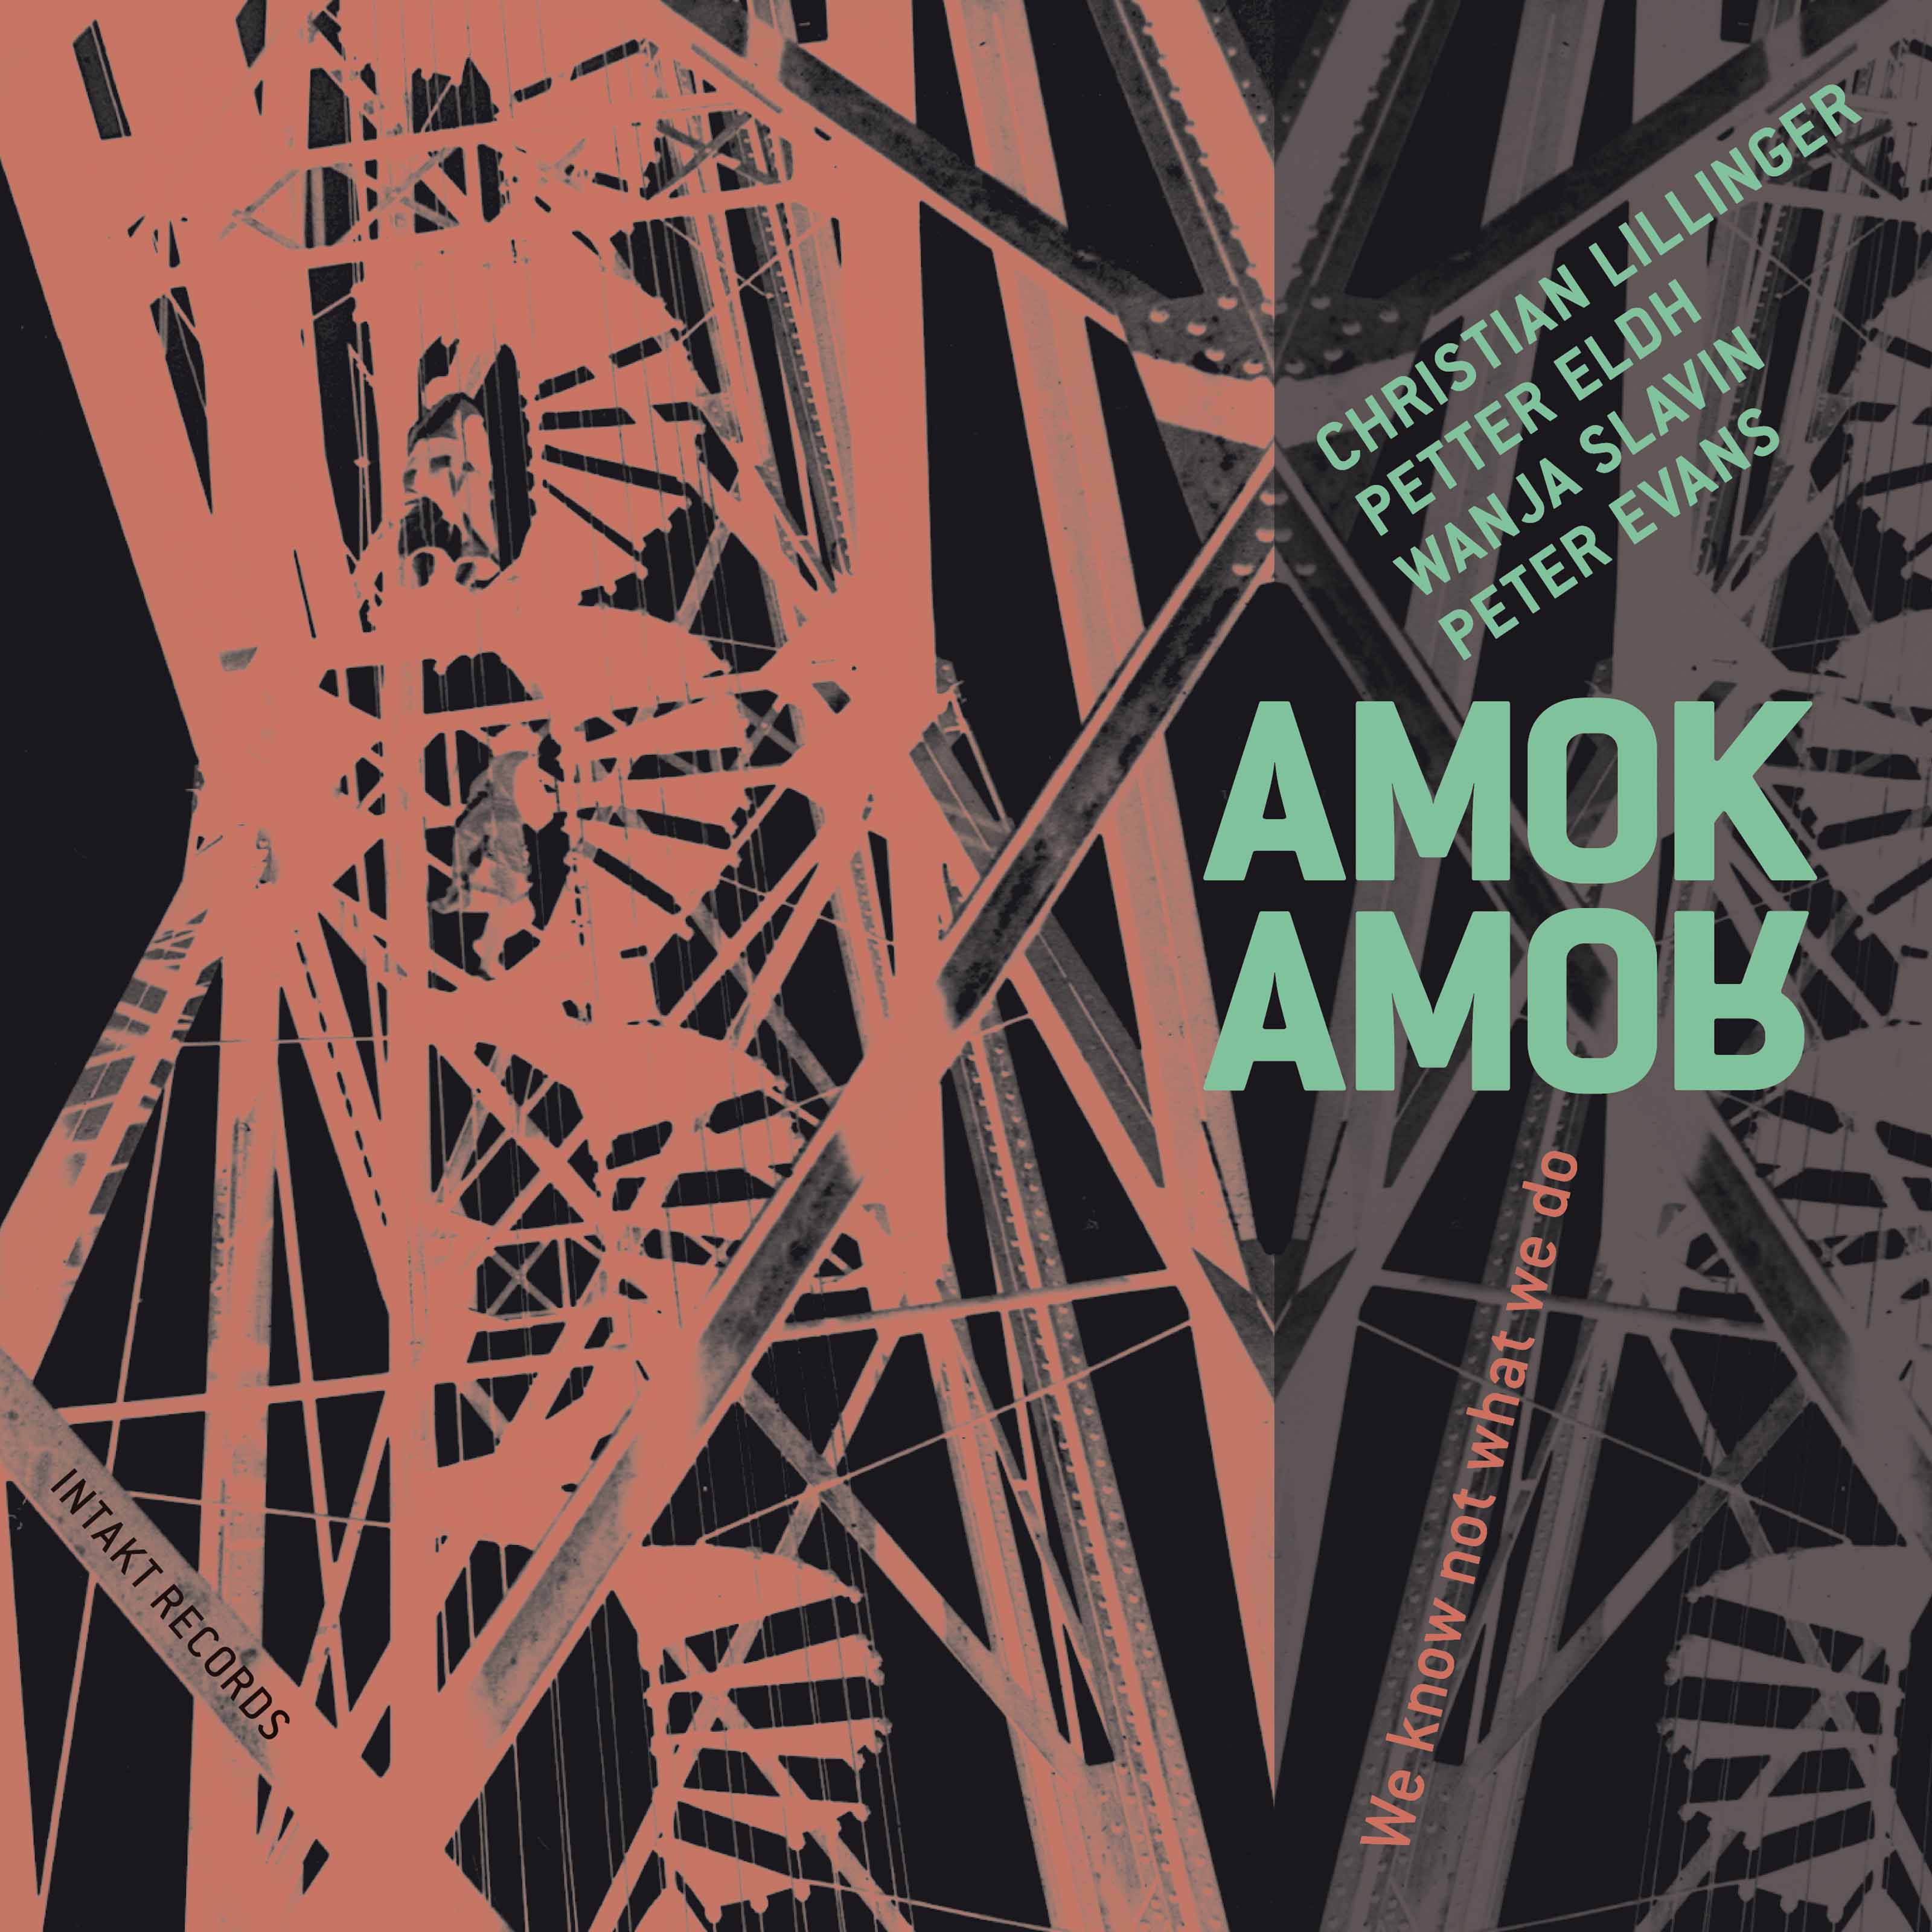 Amok Amor – We Know Not What We Do (2017) [HDTracks FLAC 24bit/44,1kHz]